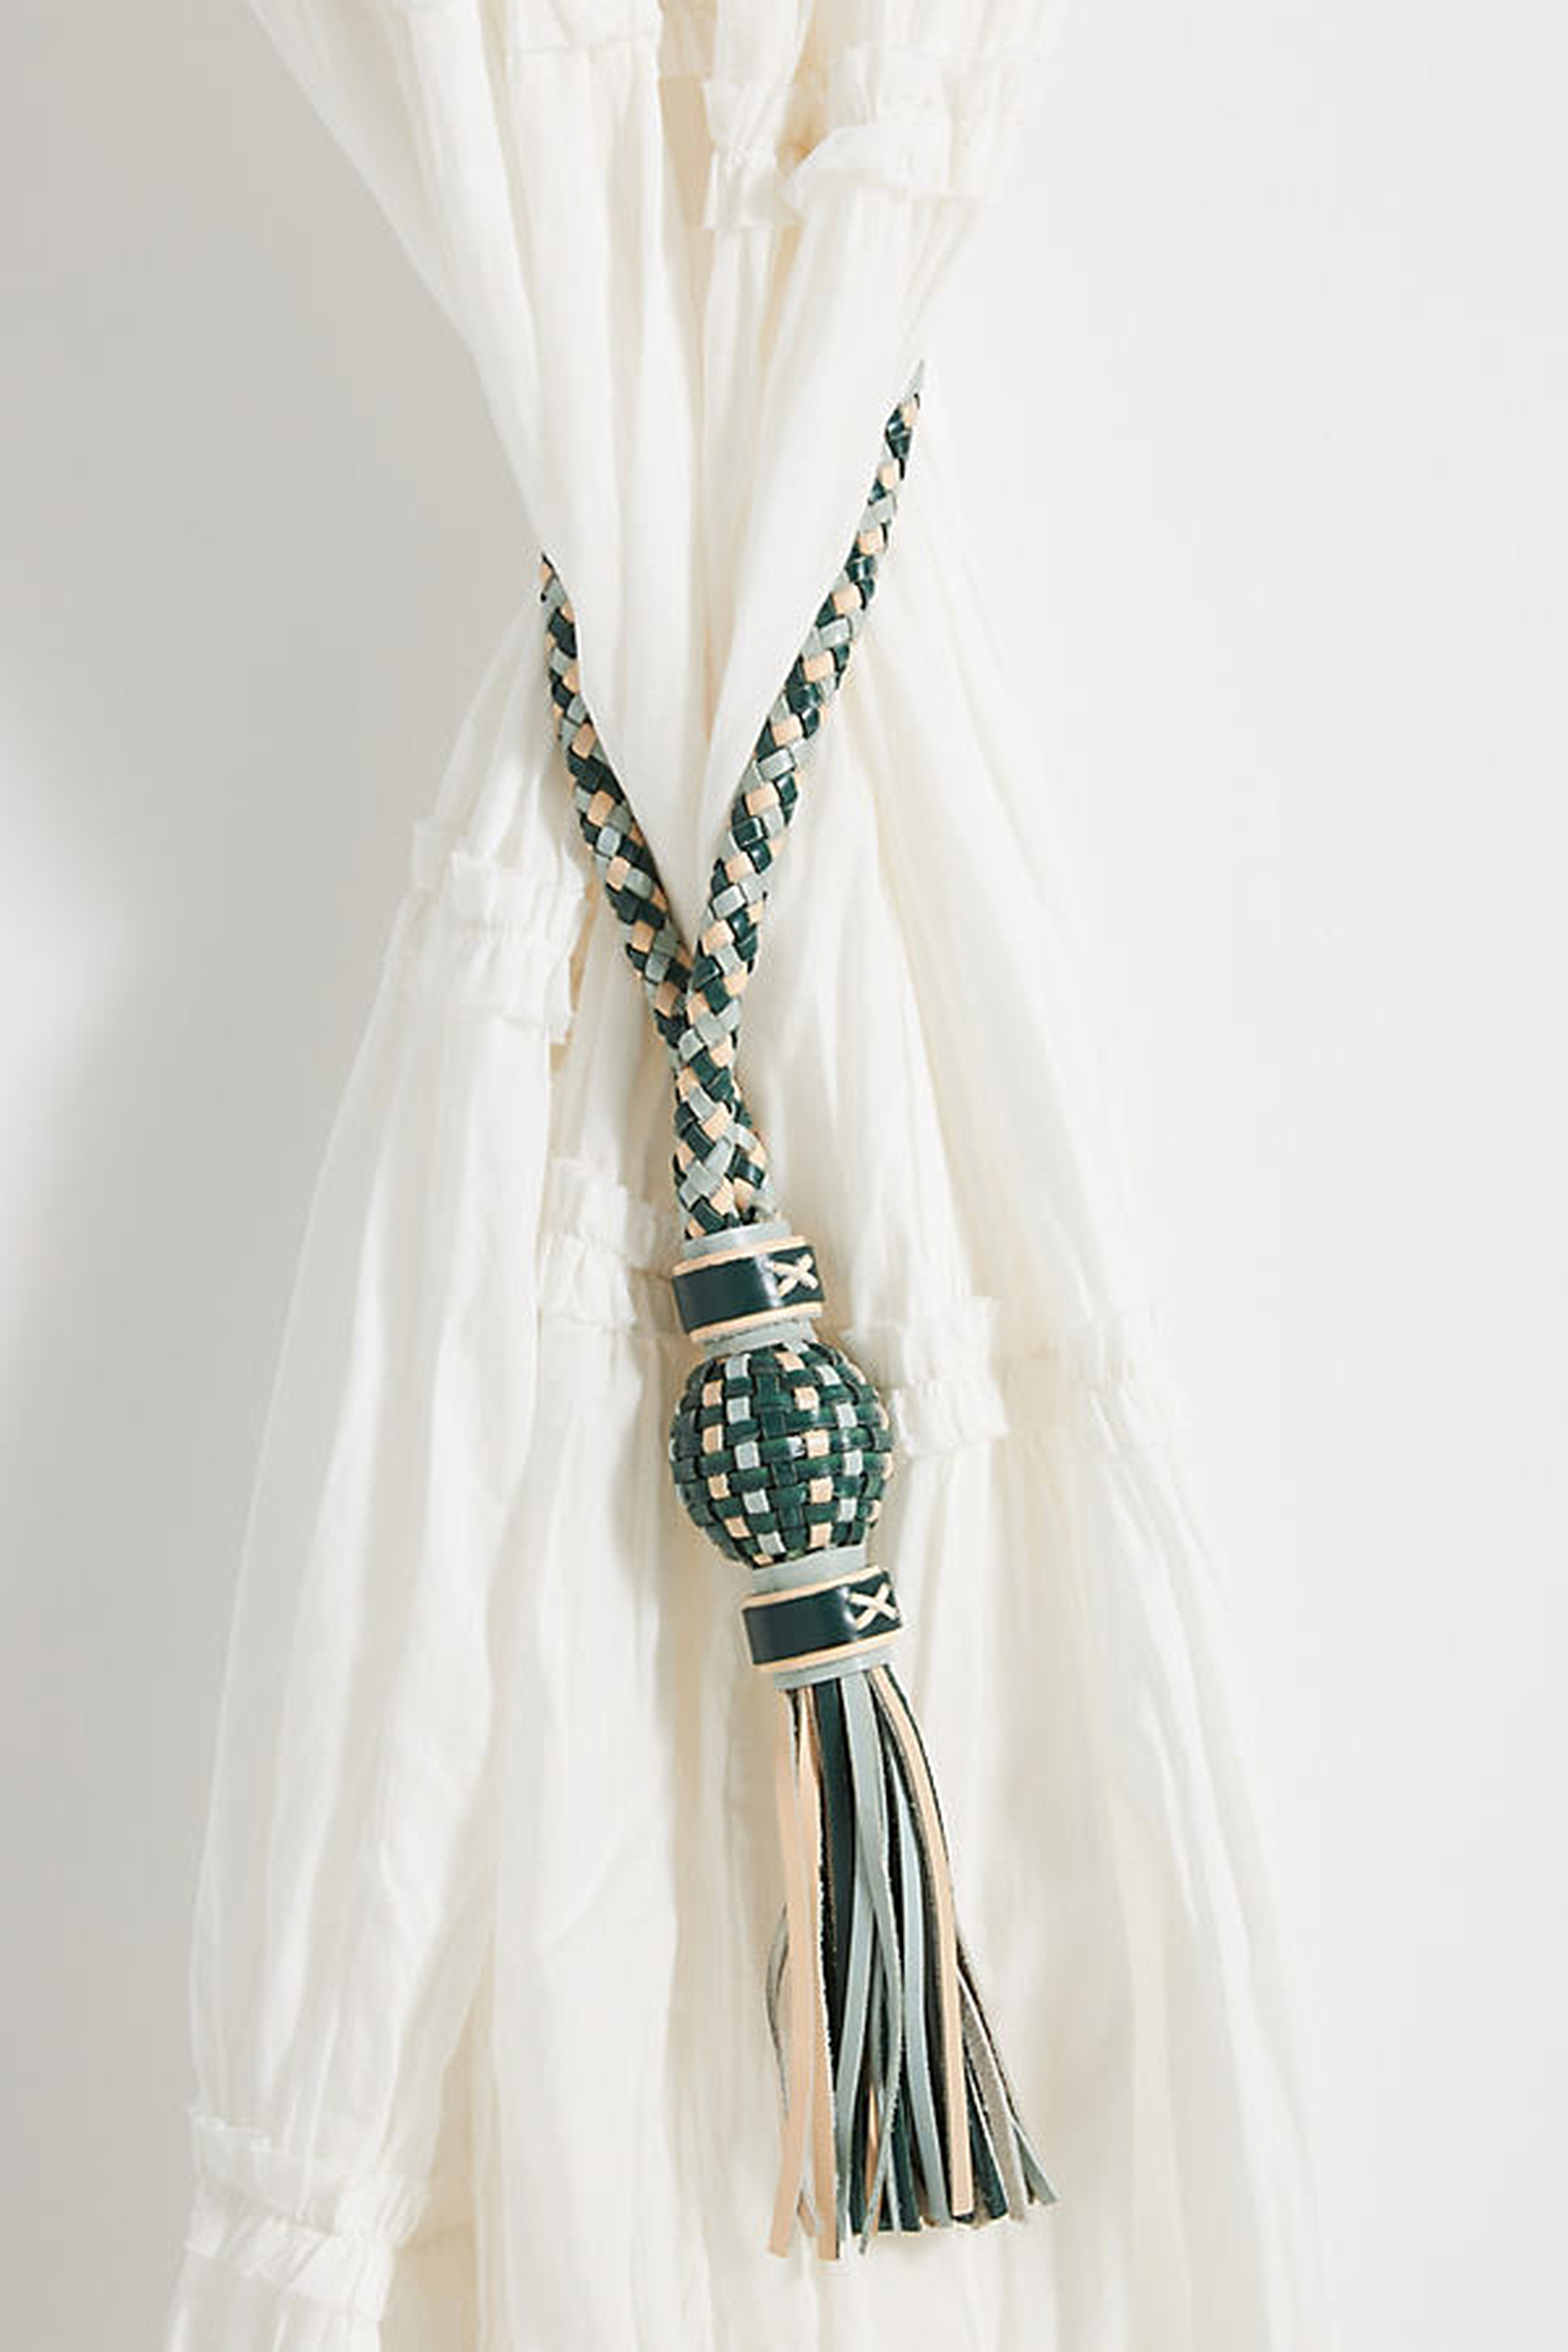 Woven Leather Tieback By Anthropologie in Assorted - Anthropologie